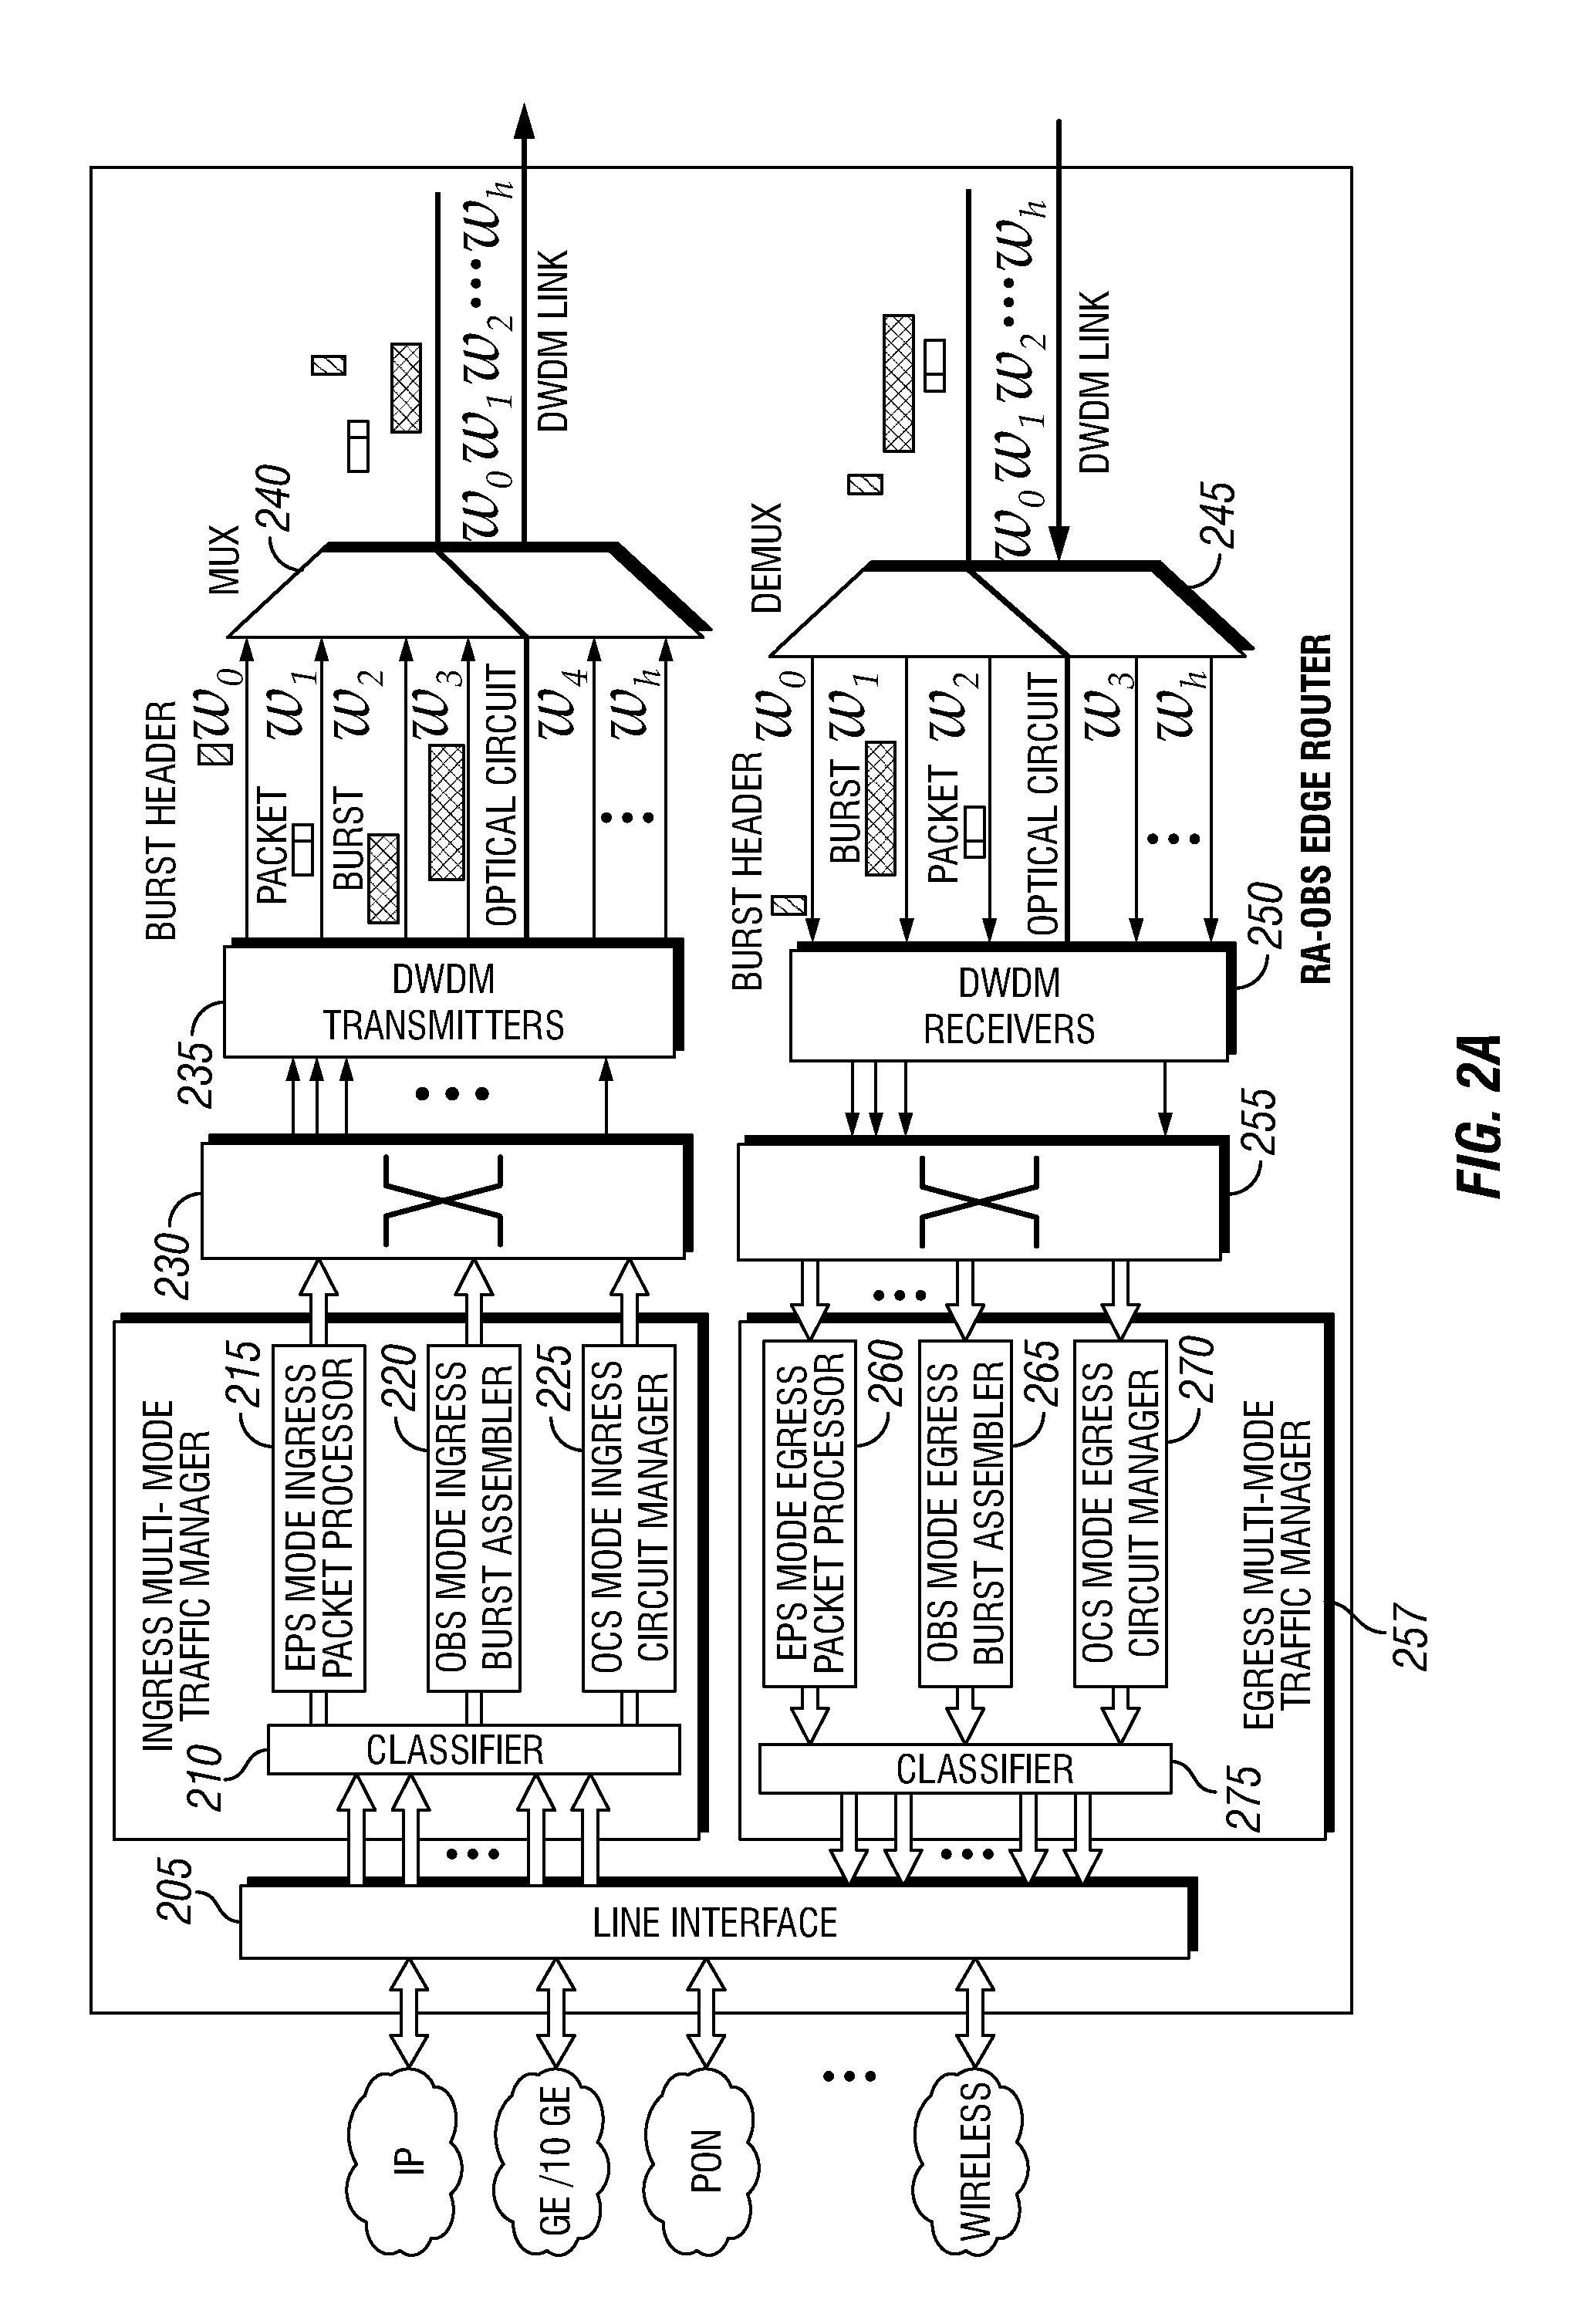 Dense Wavelength Division Multiplexing Multi-Mode Switching Systems and Methods for Concurrent and Dynamic Reconfiguration with Different Switching Modes